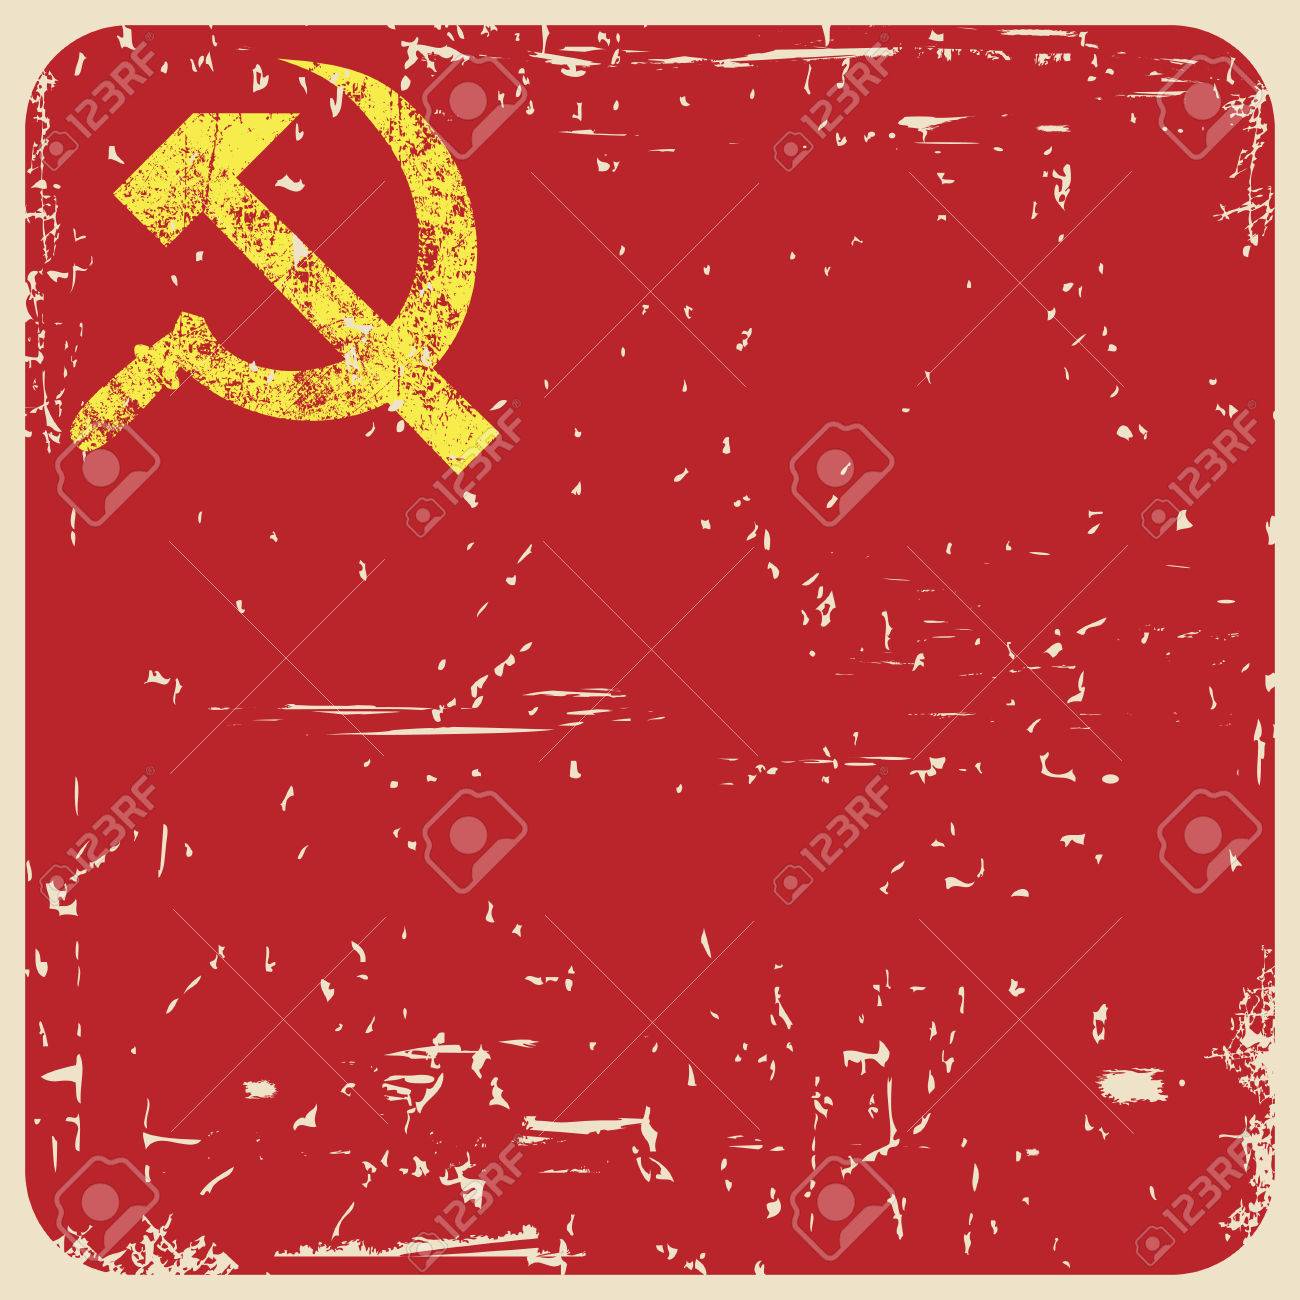 Grunge Soviet Background With Hammer And Sickle Vector